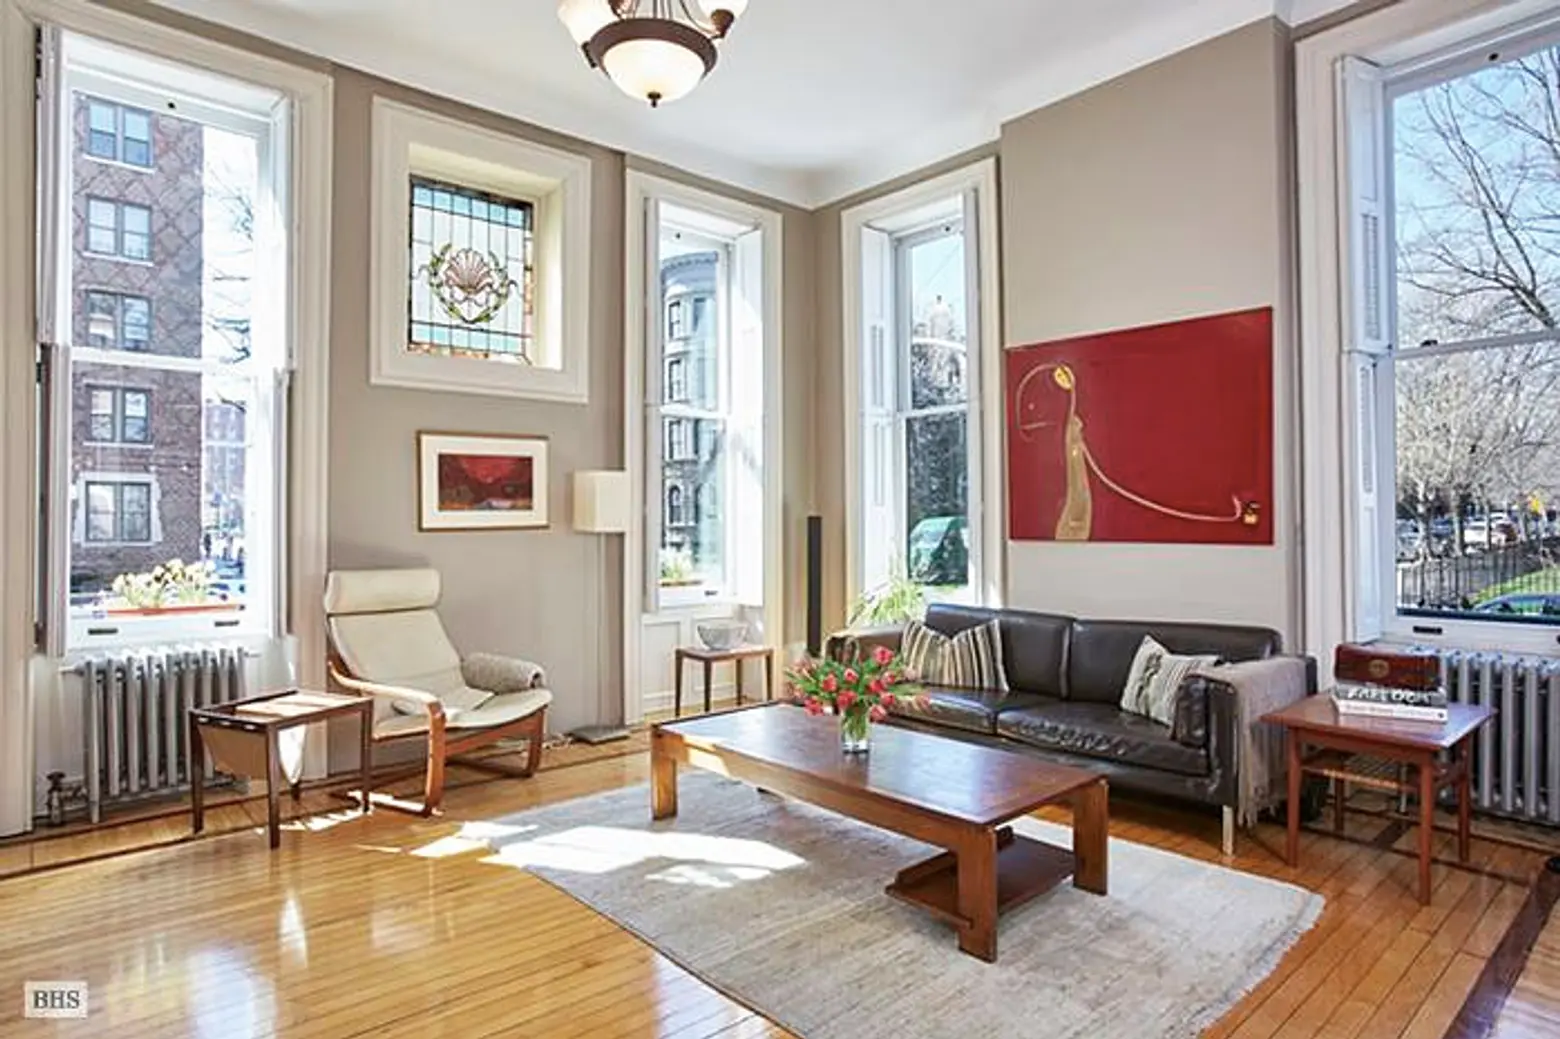 $1.4M Parlor-Level Co-op Looks Pretty and Roomy in Clinton Hill